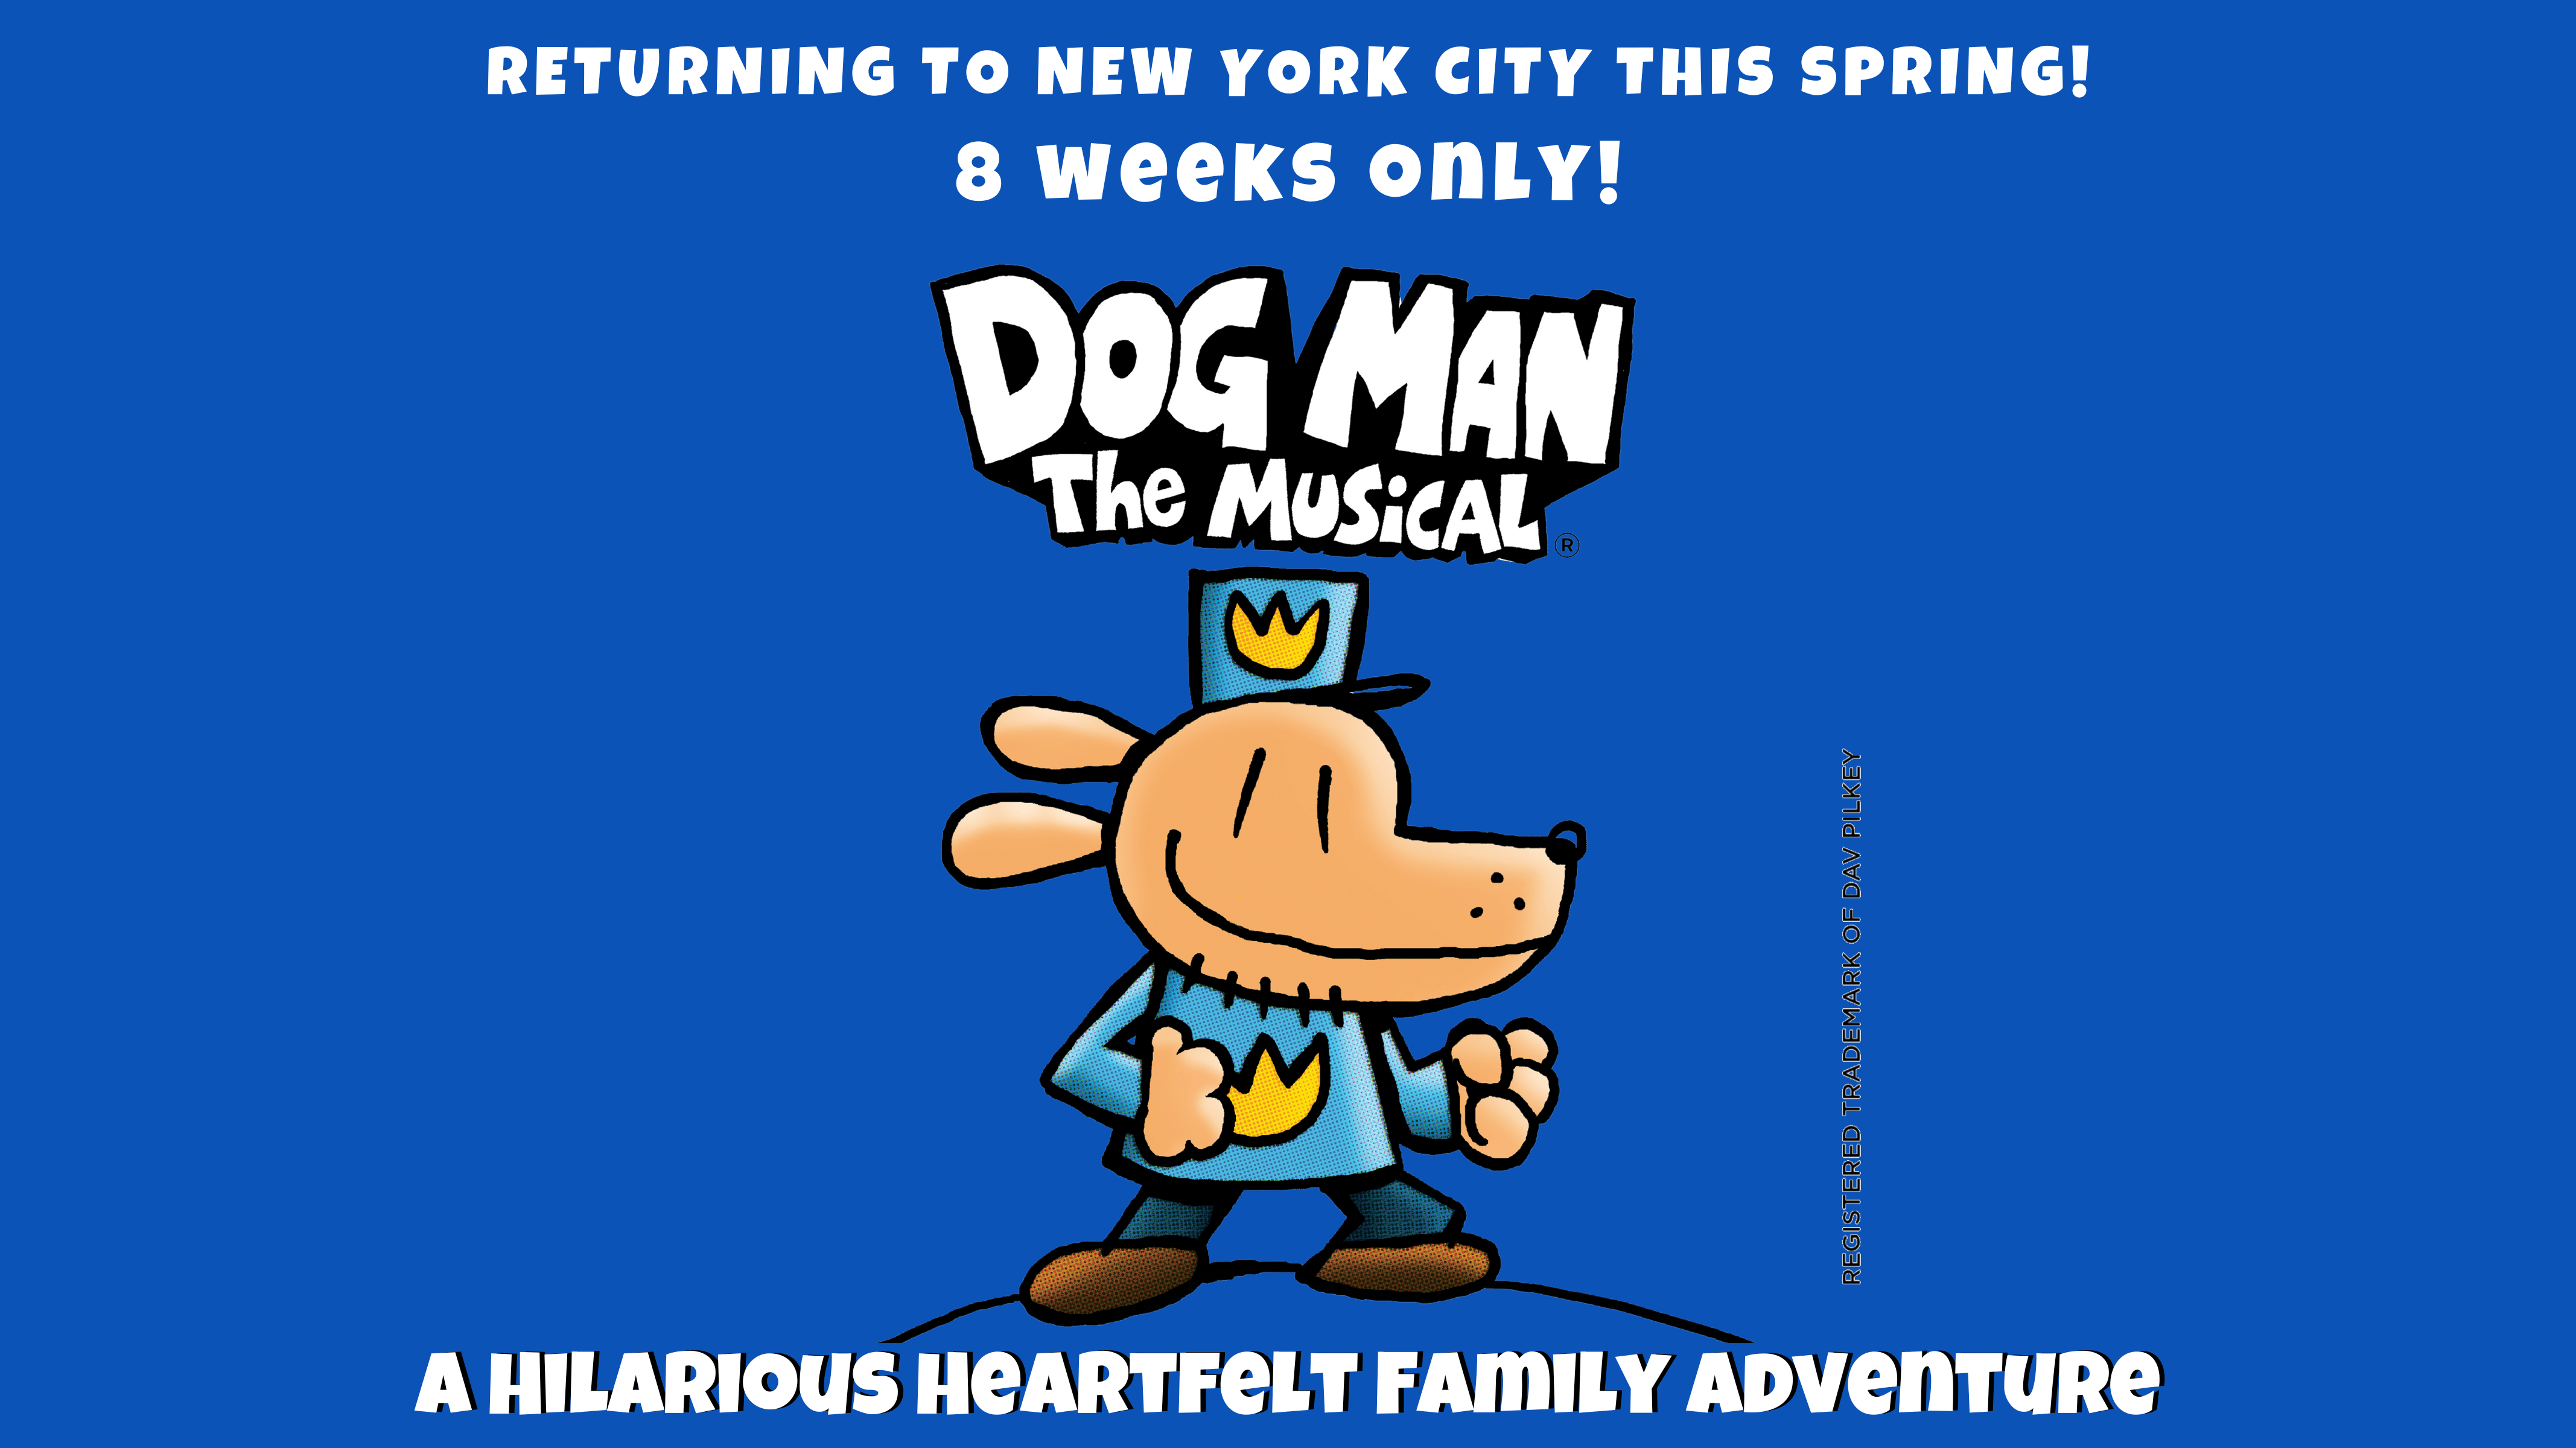 Returning to New York City this Spring! Dog Man: The Musical, A Hilarious Heartfelt Family Adventure